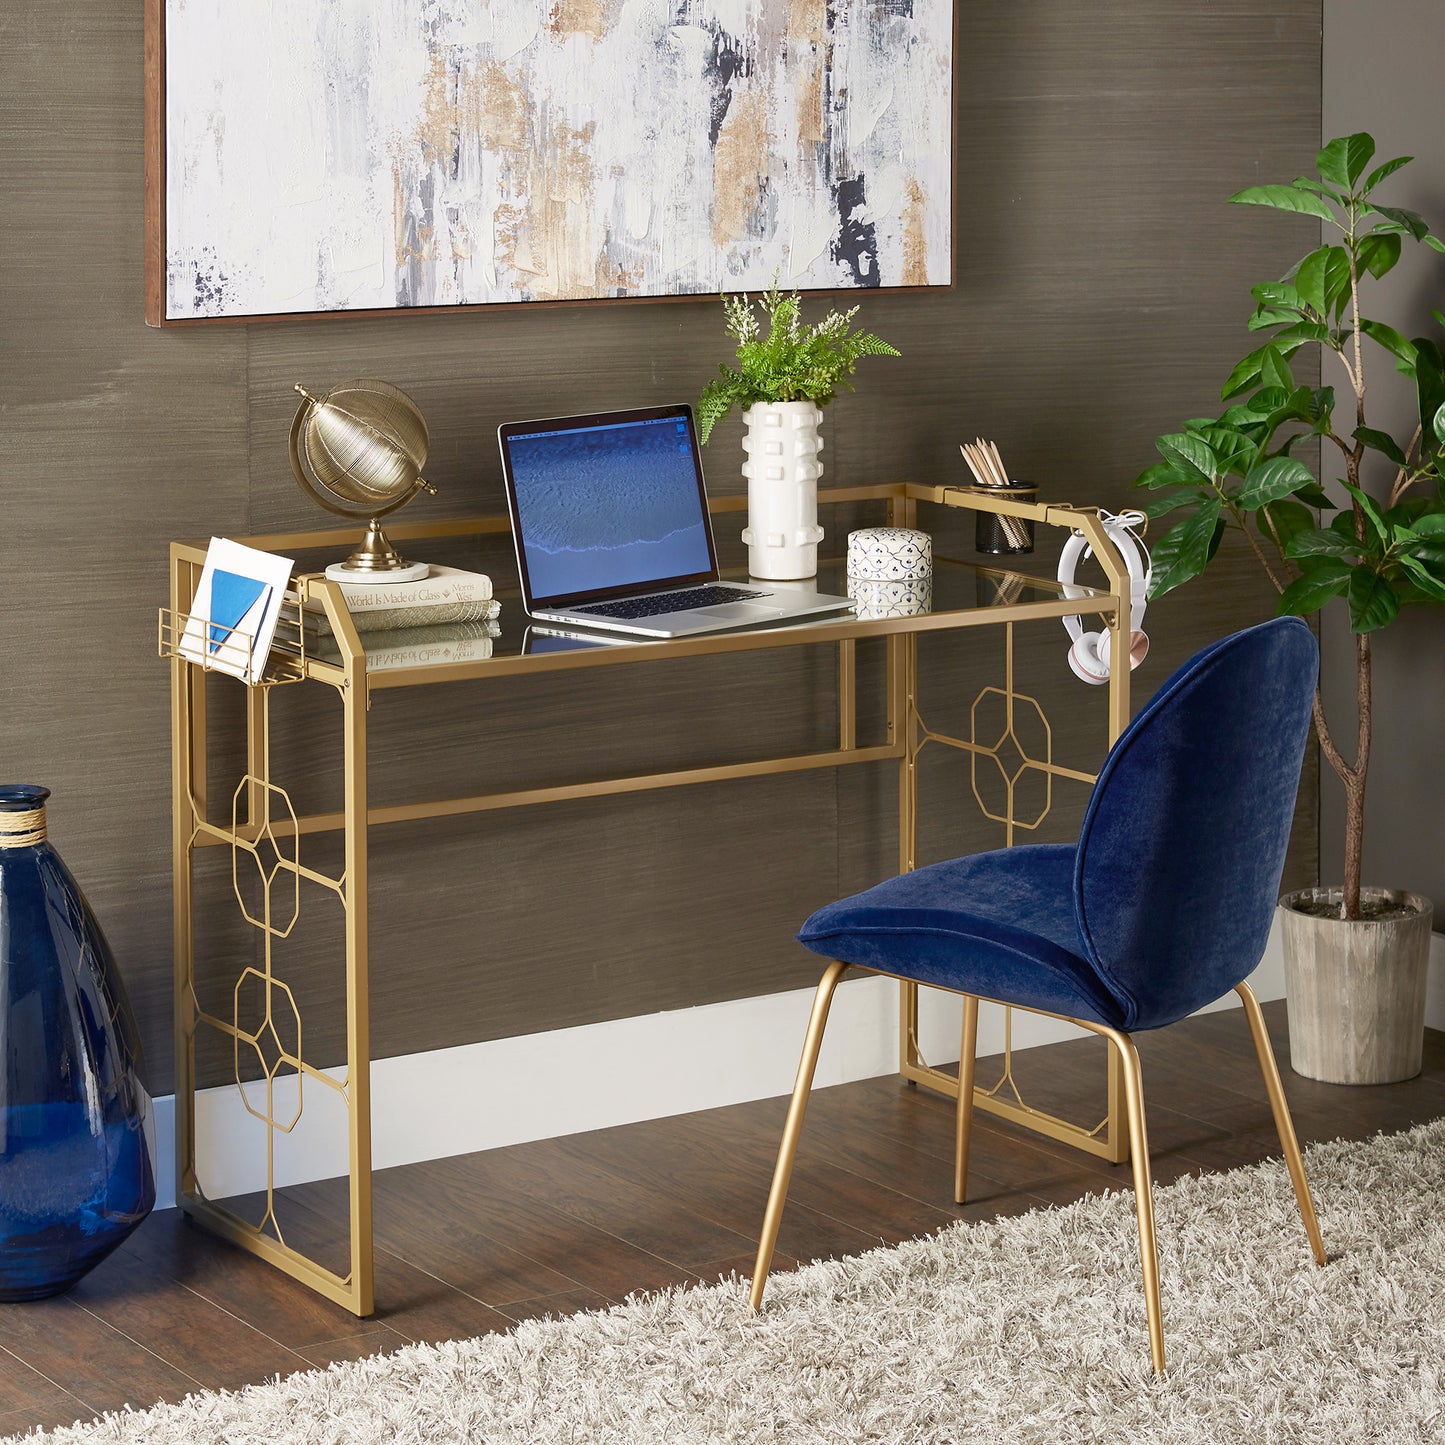 Octagon Pattern Gold Metal and Glass Desk